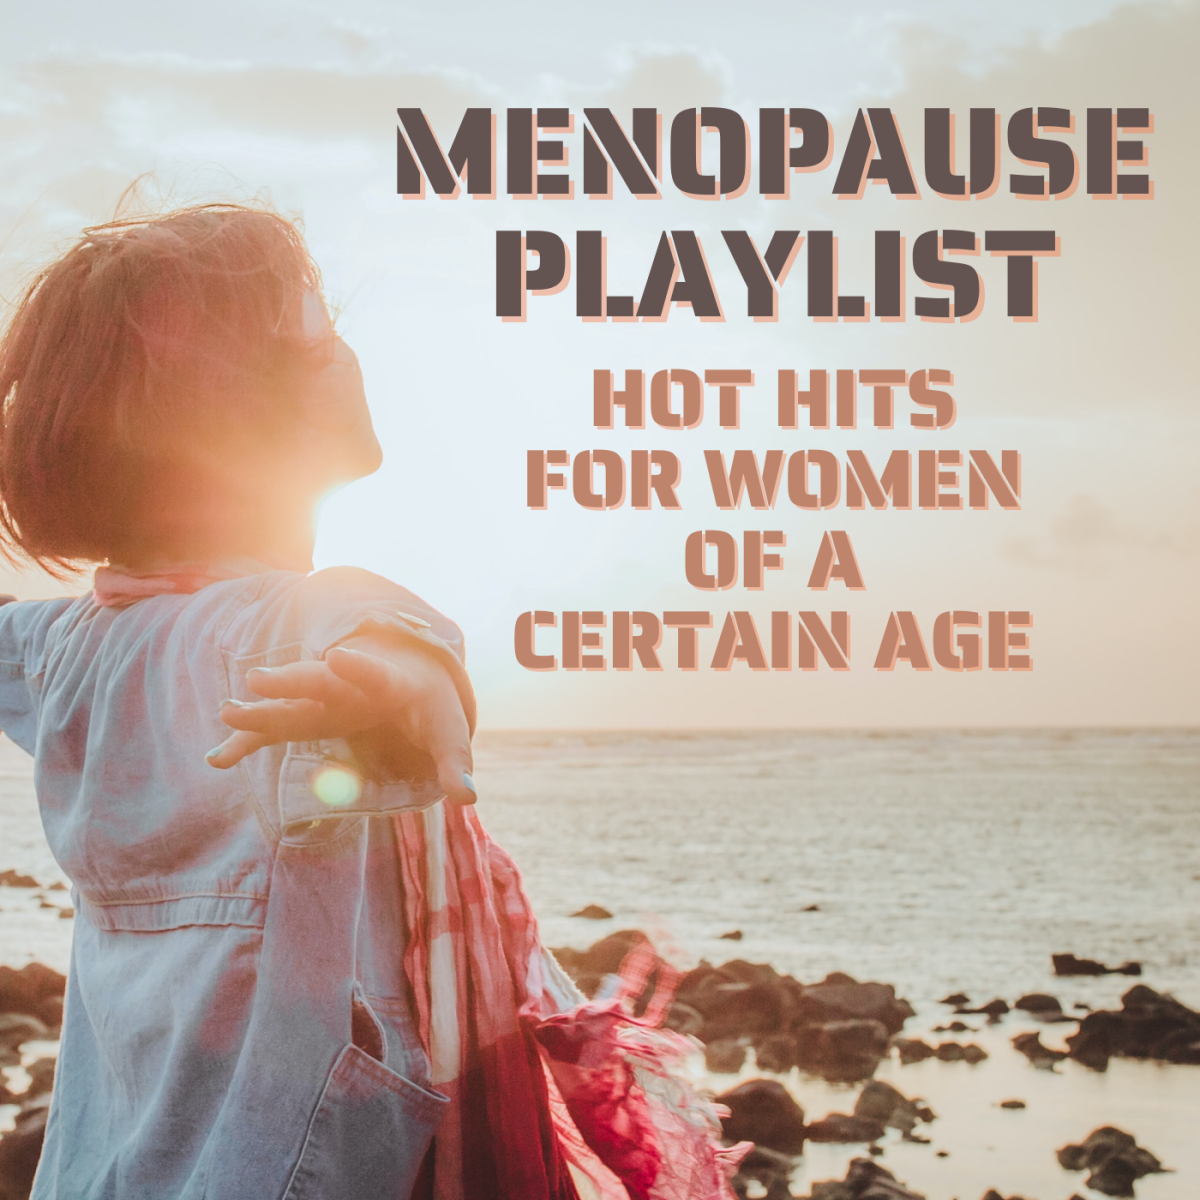 You can't fight Mother Nature, so you might as well celebrate it. Make a fun song playlist for yourself or your favorite Woman Of A Certain Age using these rock, pop, country, and R&B hits.